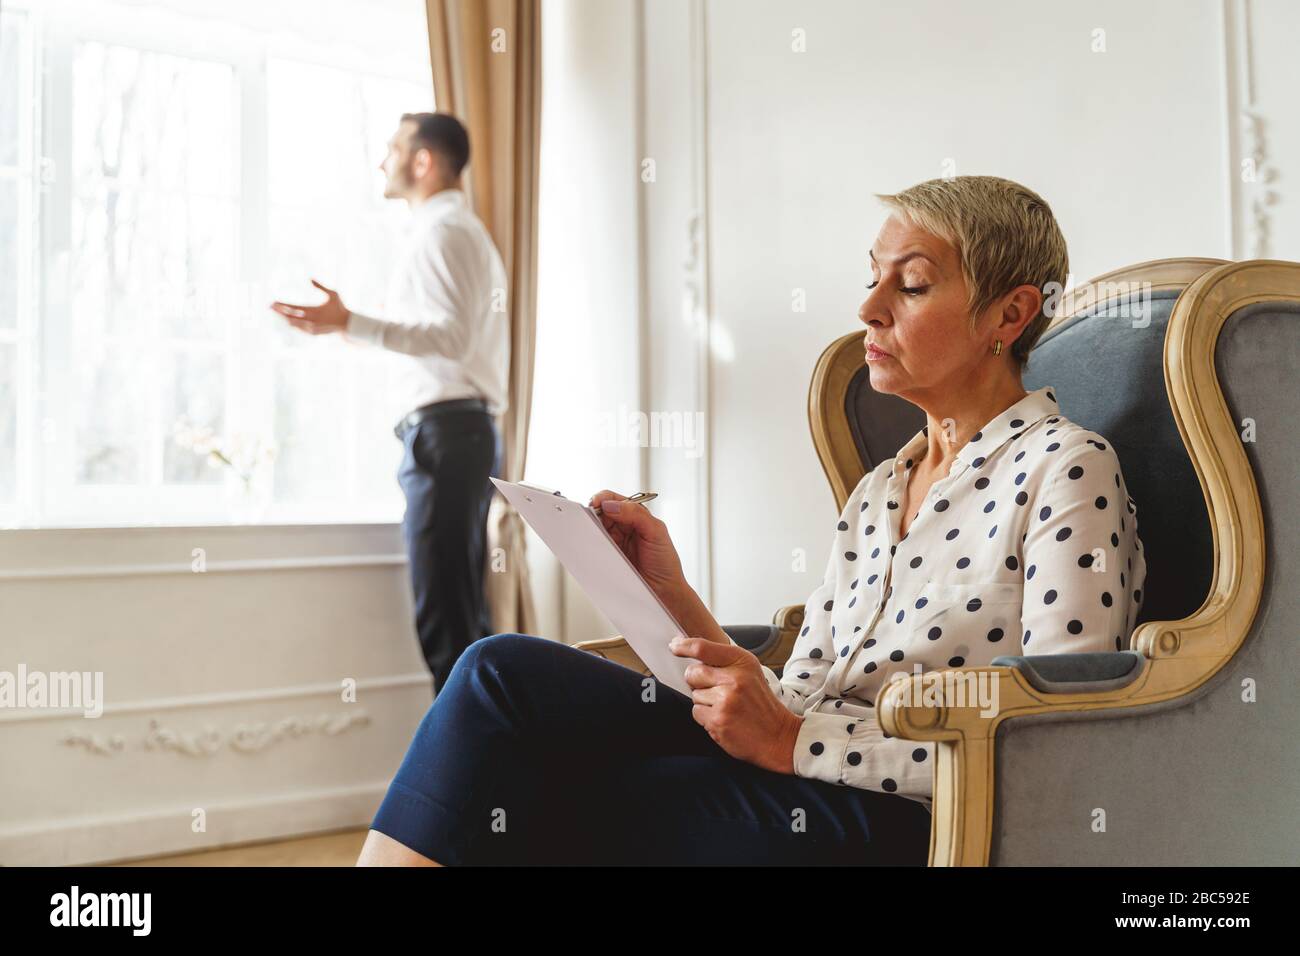 Psychoanalyst jotting down notes during the therapy session Stock Photo